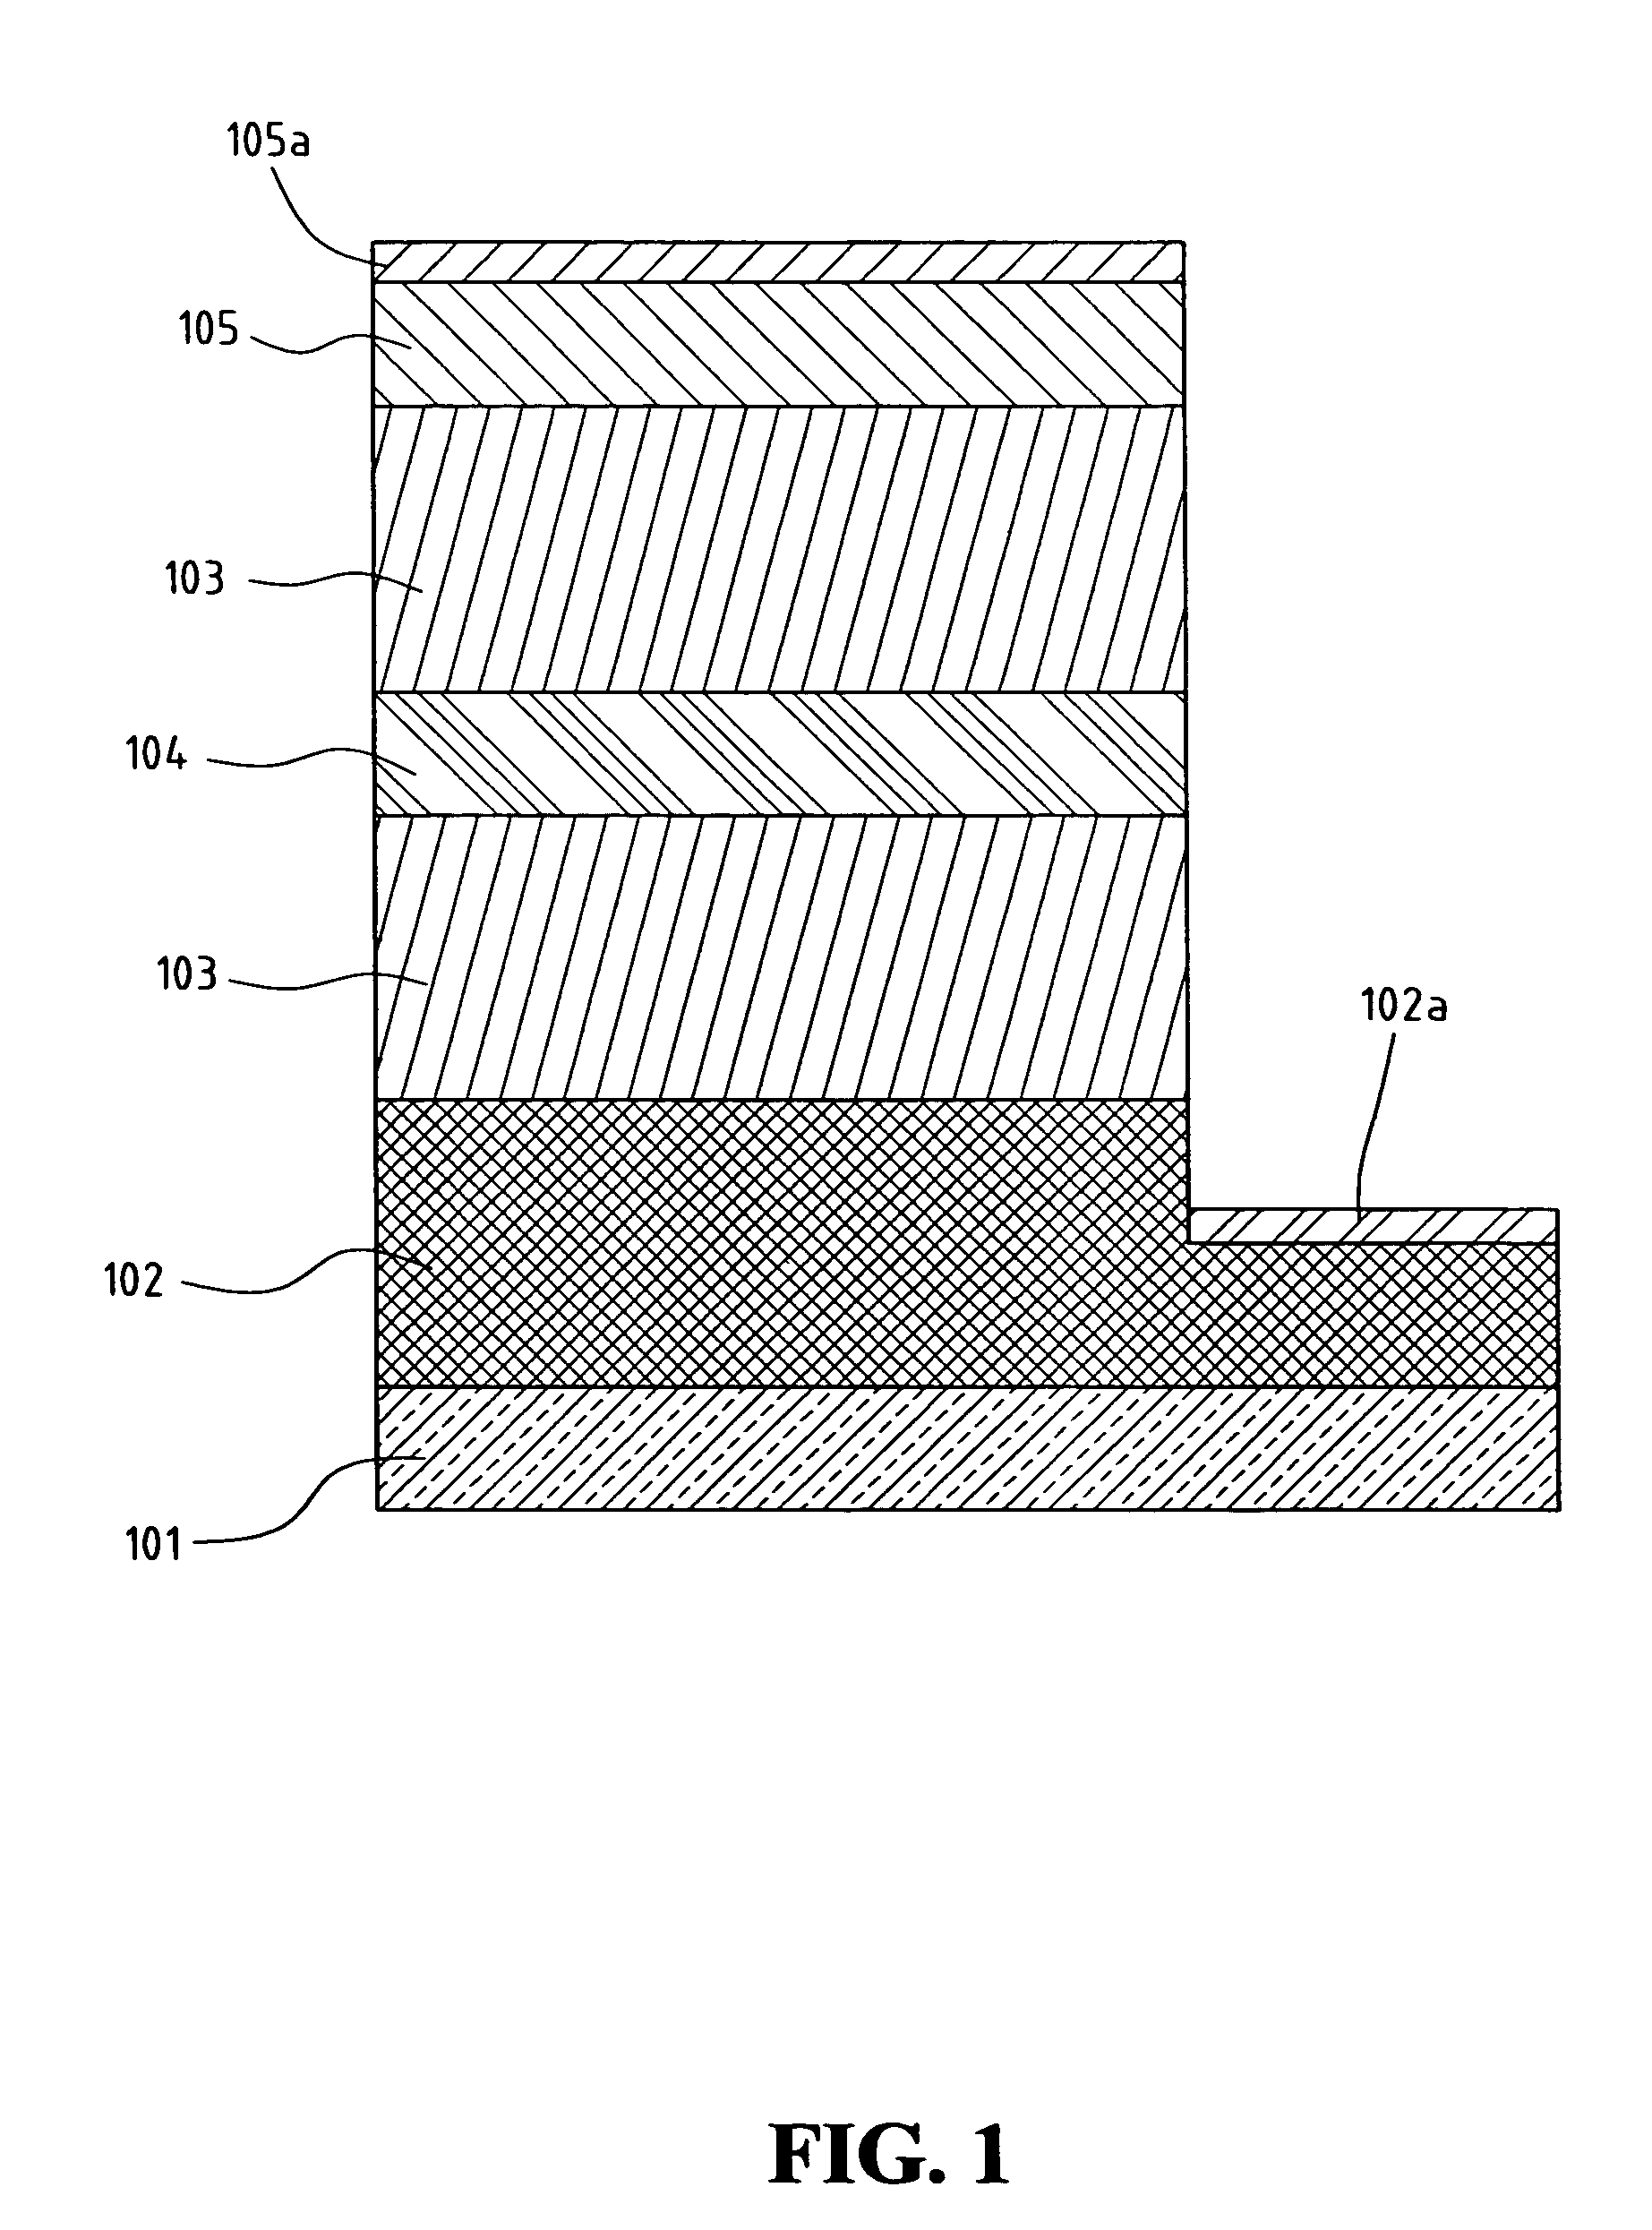 Gallium-nitride based light-emitting diode epitaxial structure